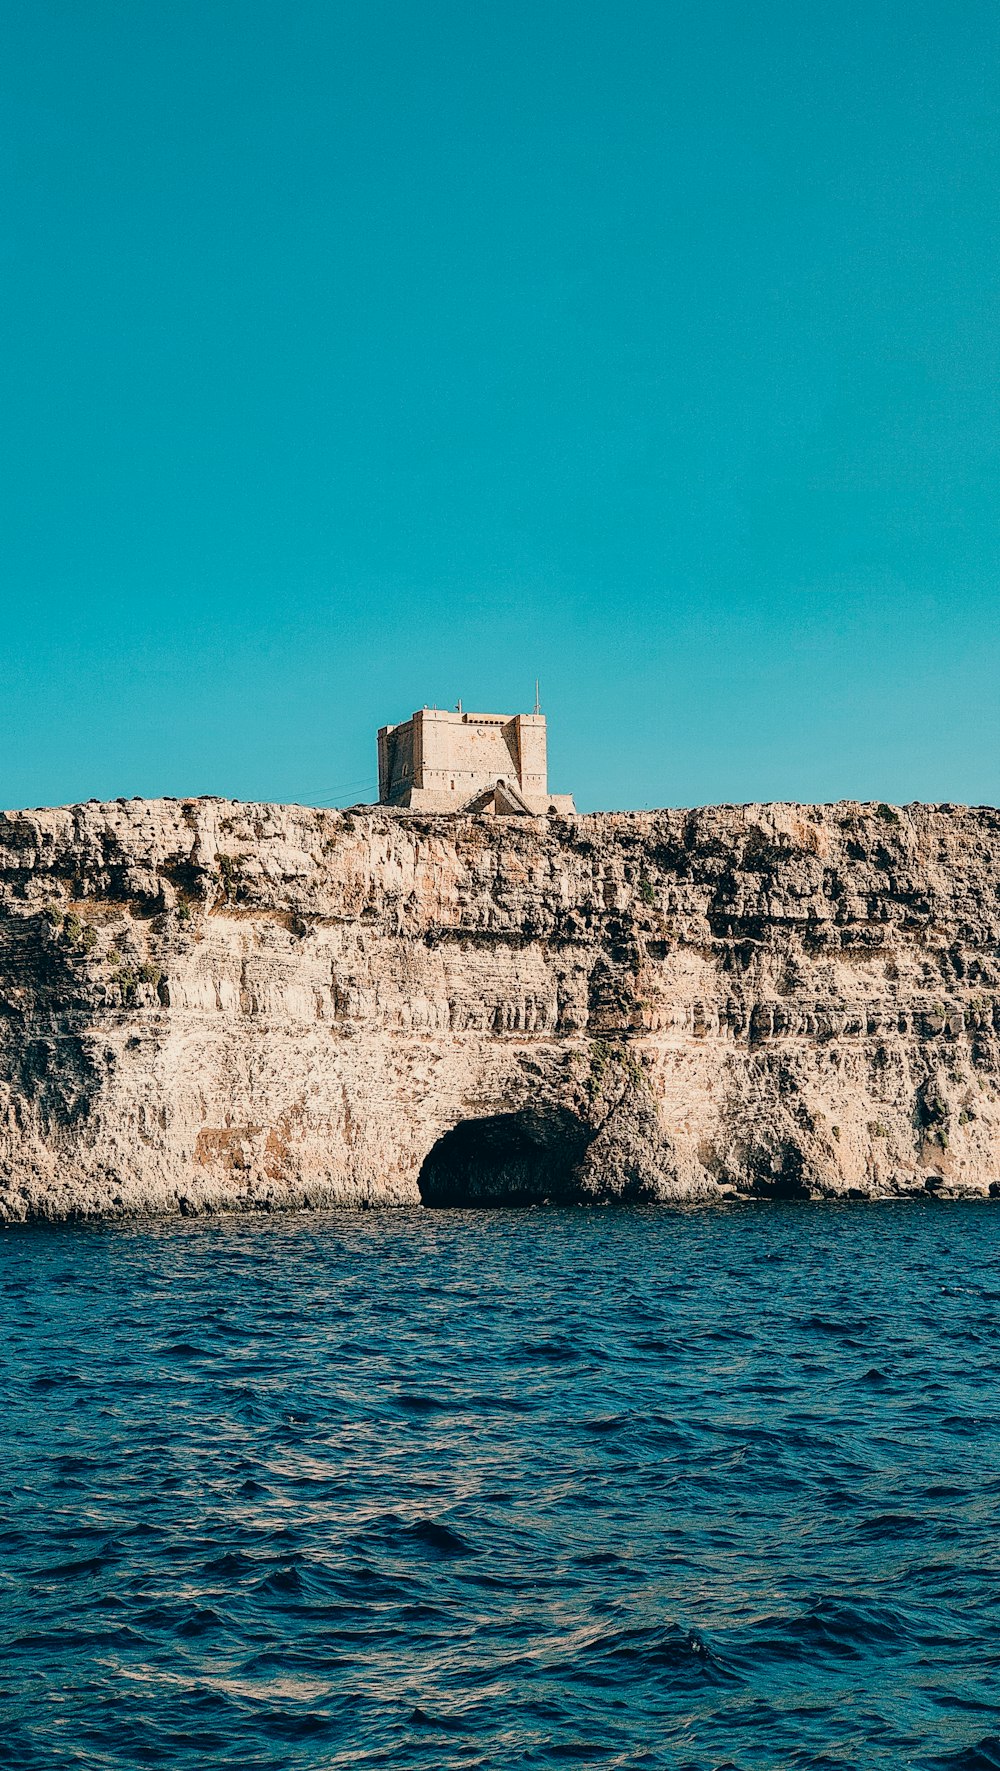 a building on top of a cliff over a body of water